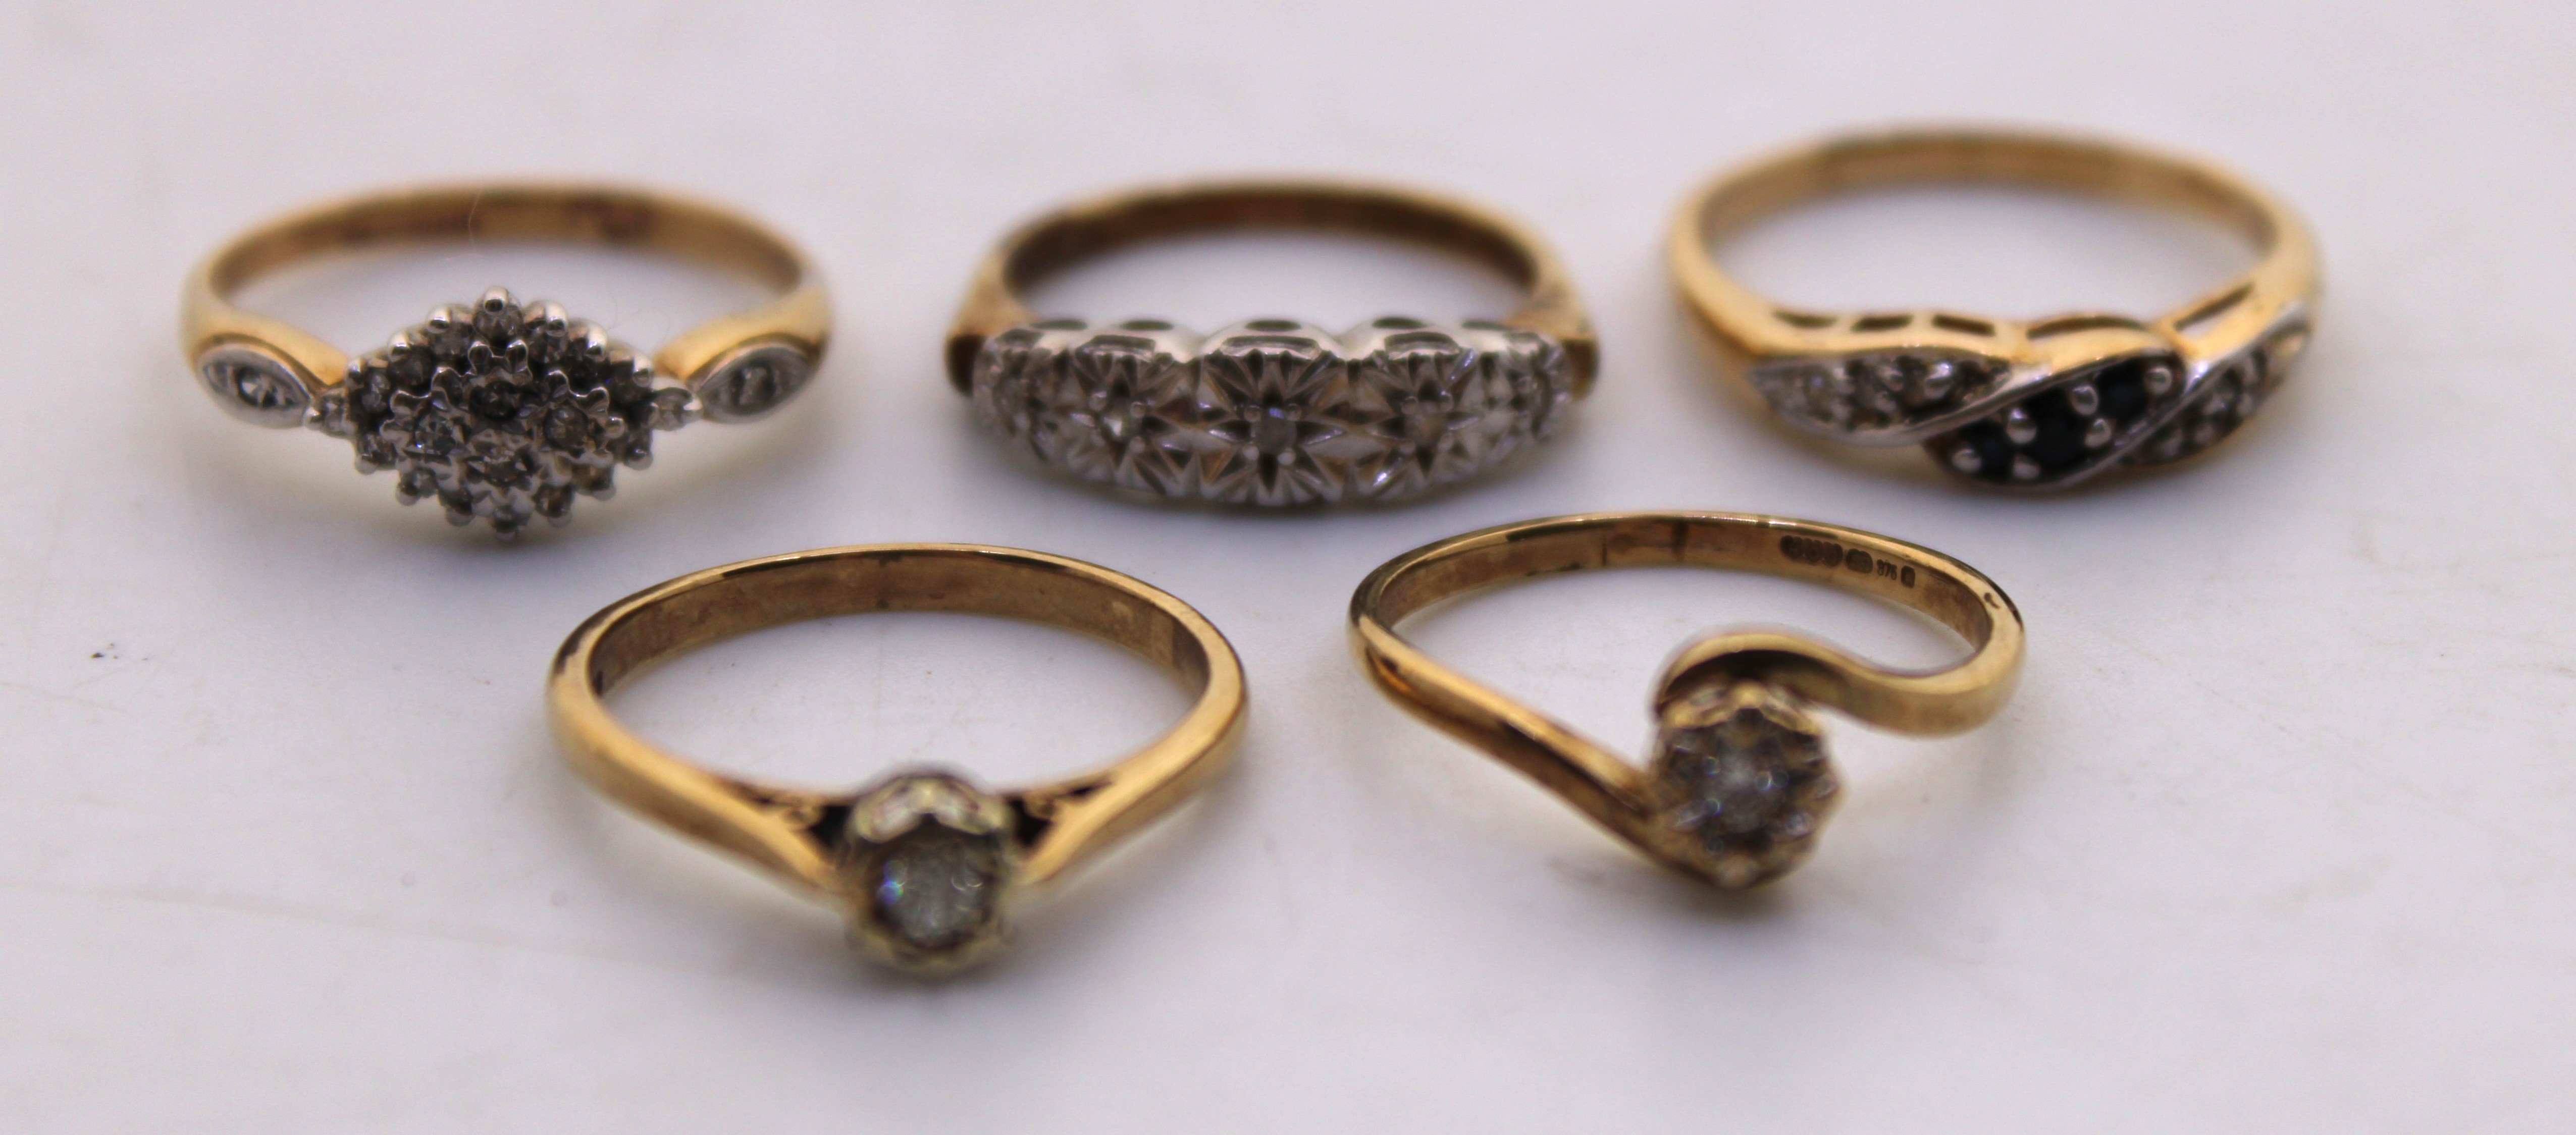 Selection of Five 9ct Gold Diamond Rings. The biggest Total Diamond Carat Weight is approx. 0.